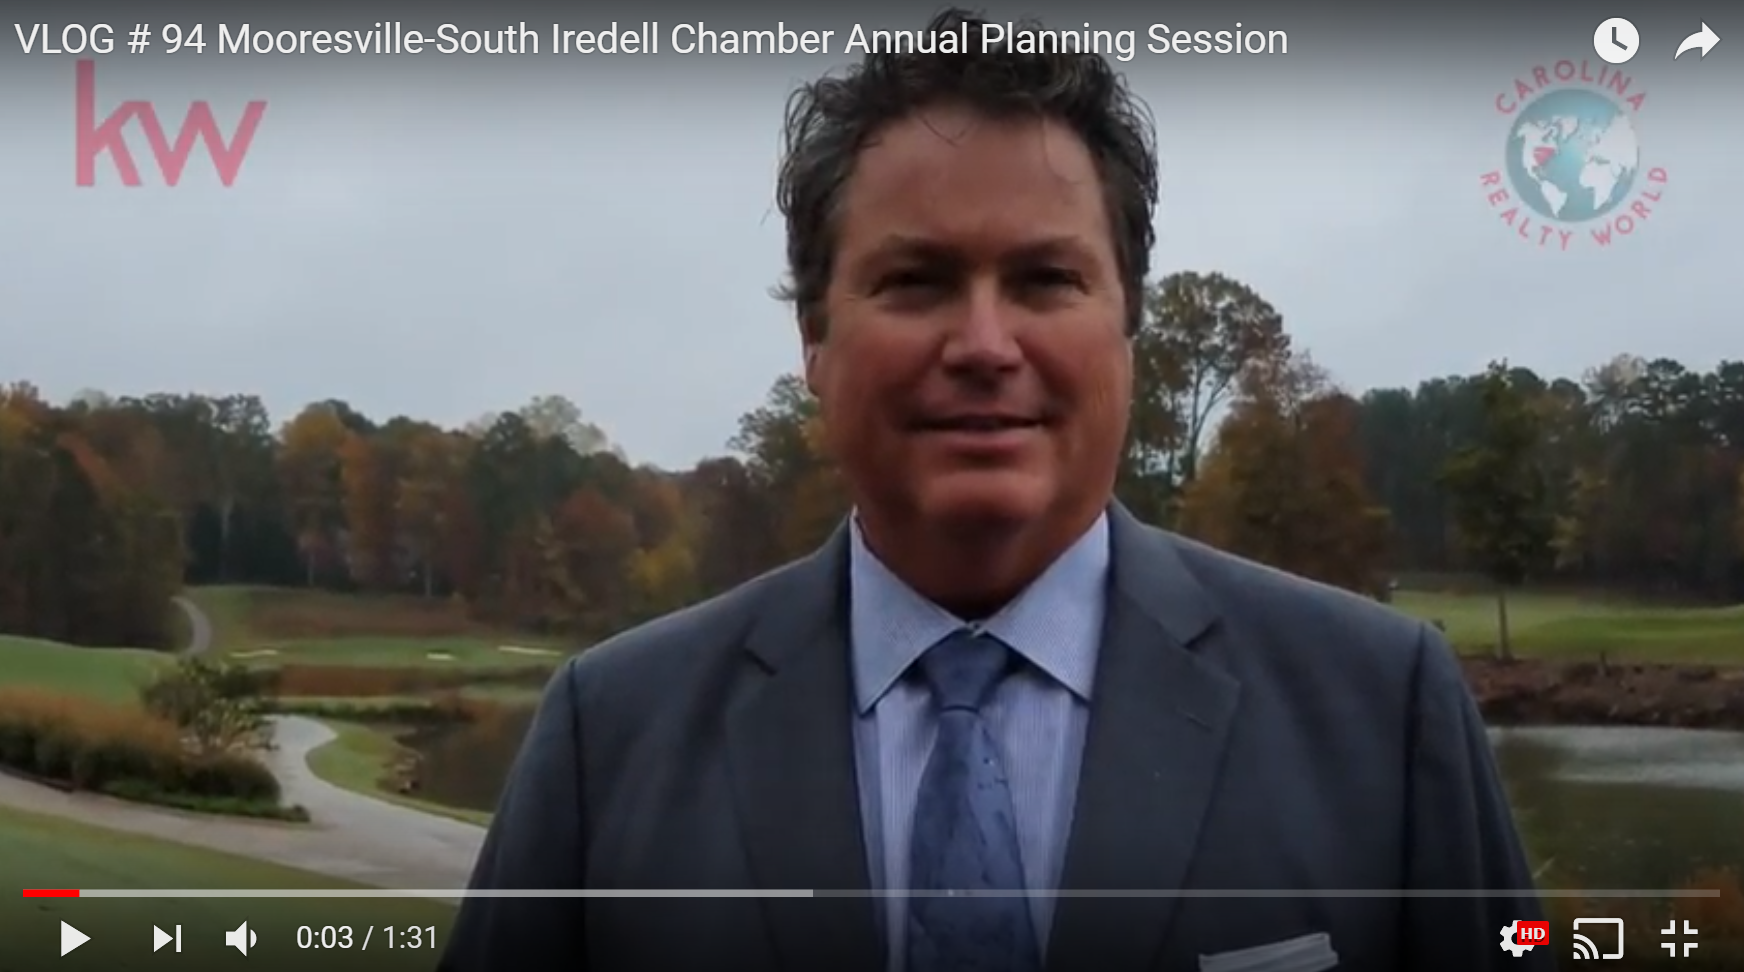 VLOG # 94 Mooresville-South Iredell Chamber Annual Planning Session